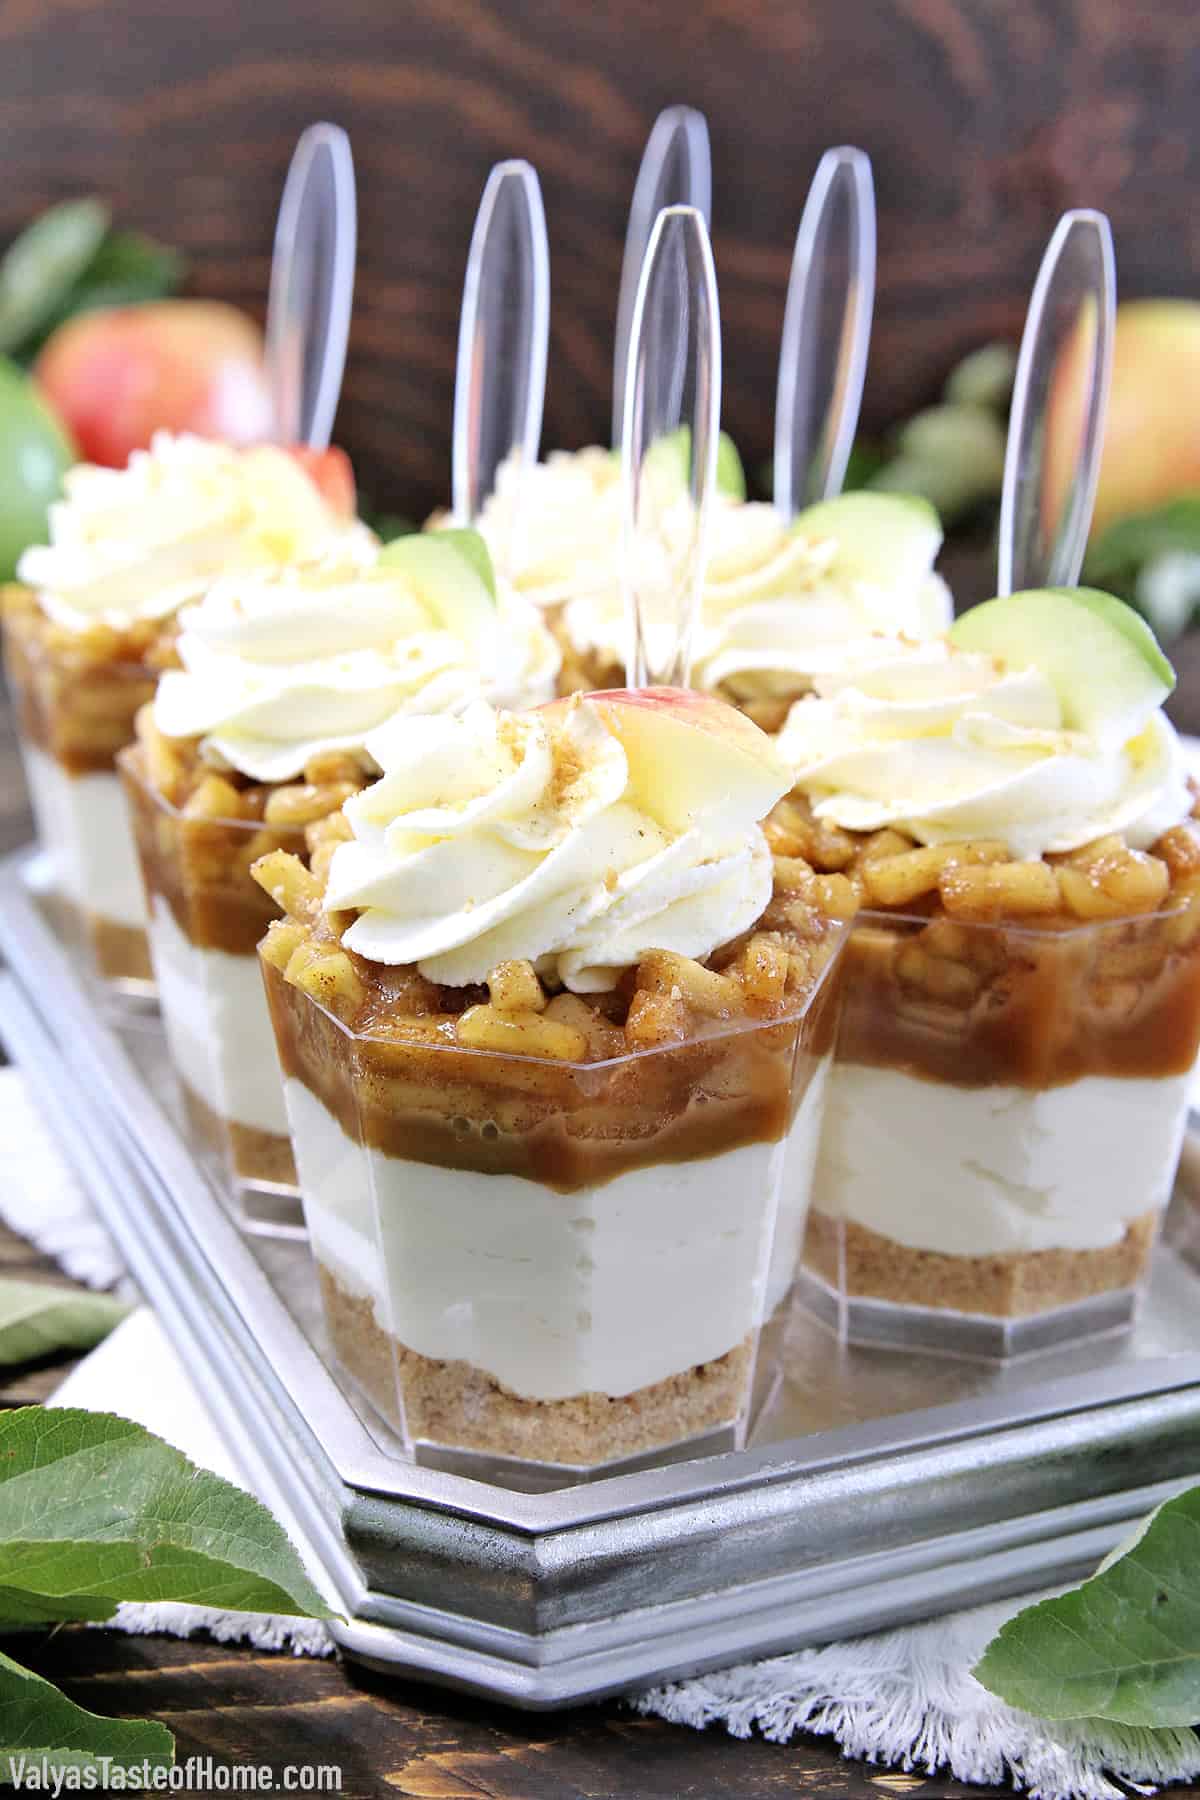 These No Bake Caramel Apple Pie Cheesecake Parfaits are out of this world delicious! Layers of goodness: crushed buttery graham cracker crust, smooth and creamy cheesecake filling, tasty and rich organic caramel, slathered with fantastic homemade diced apple pie filling, and finally topped with whipped cream.